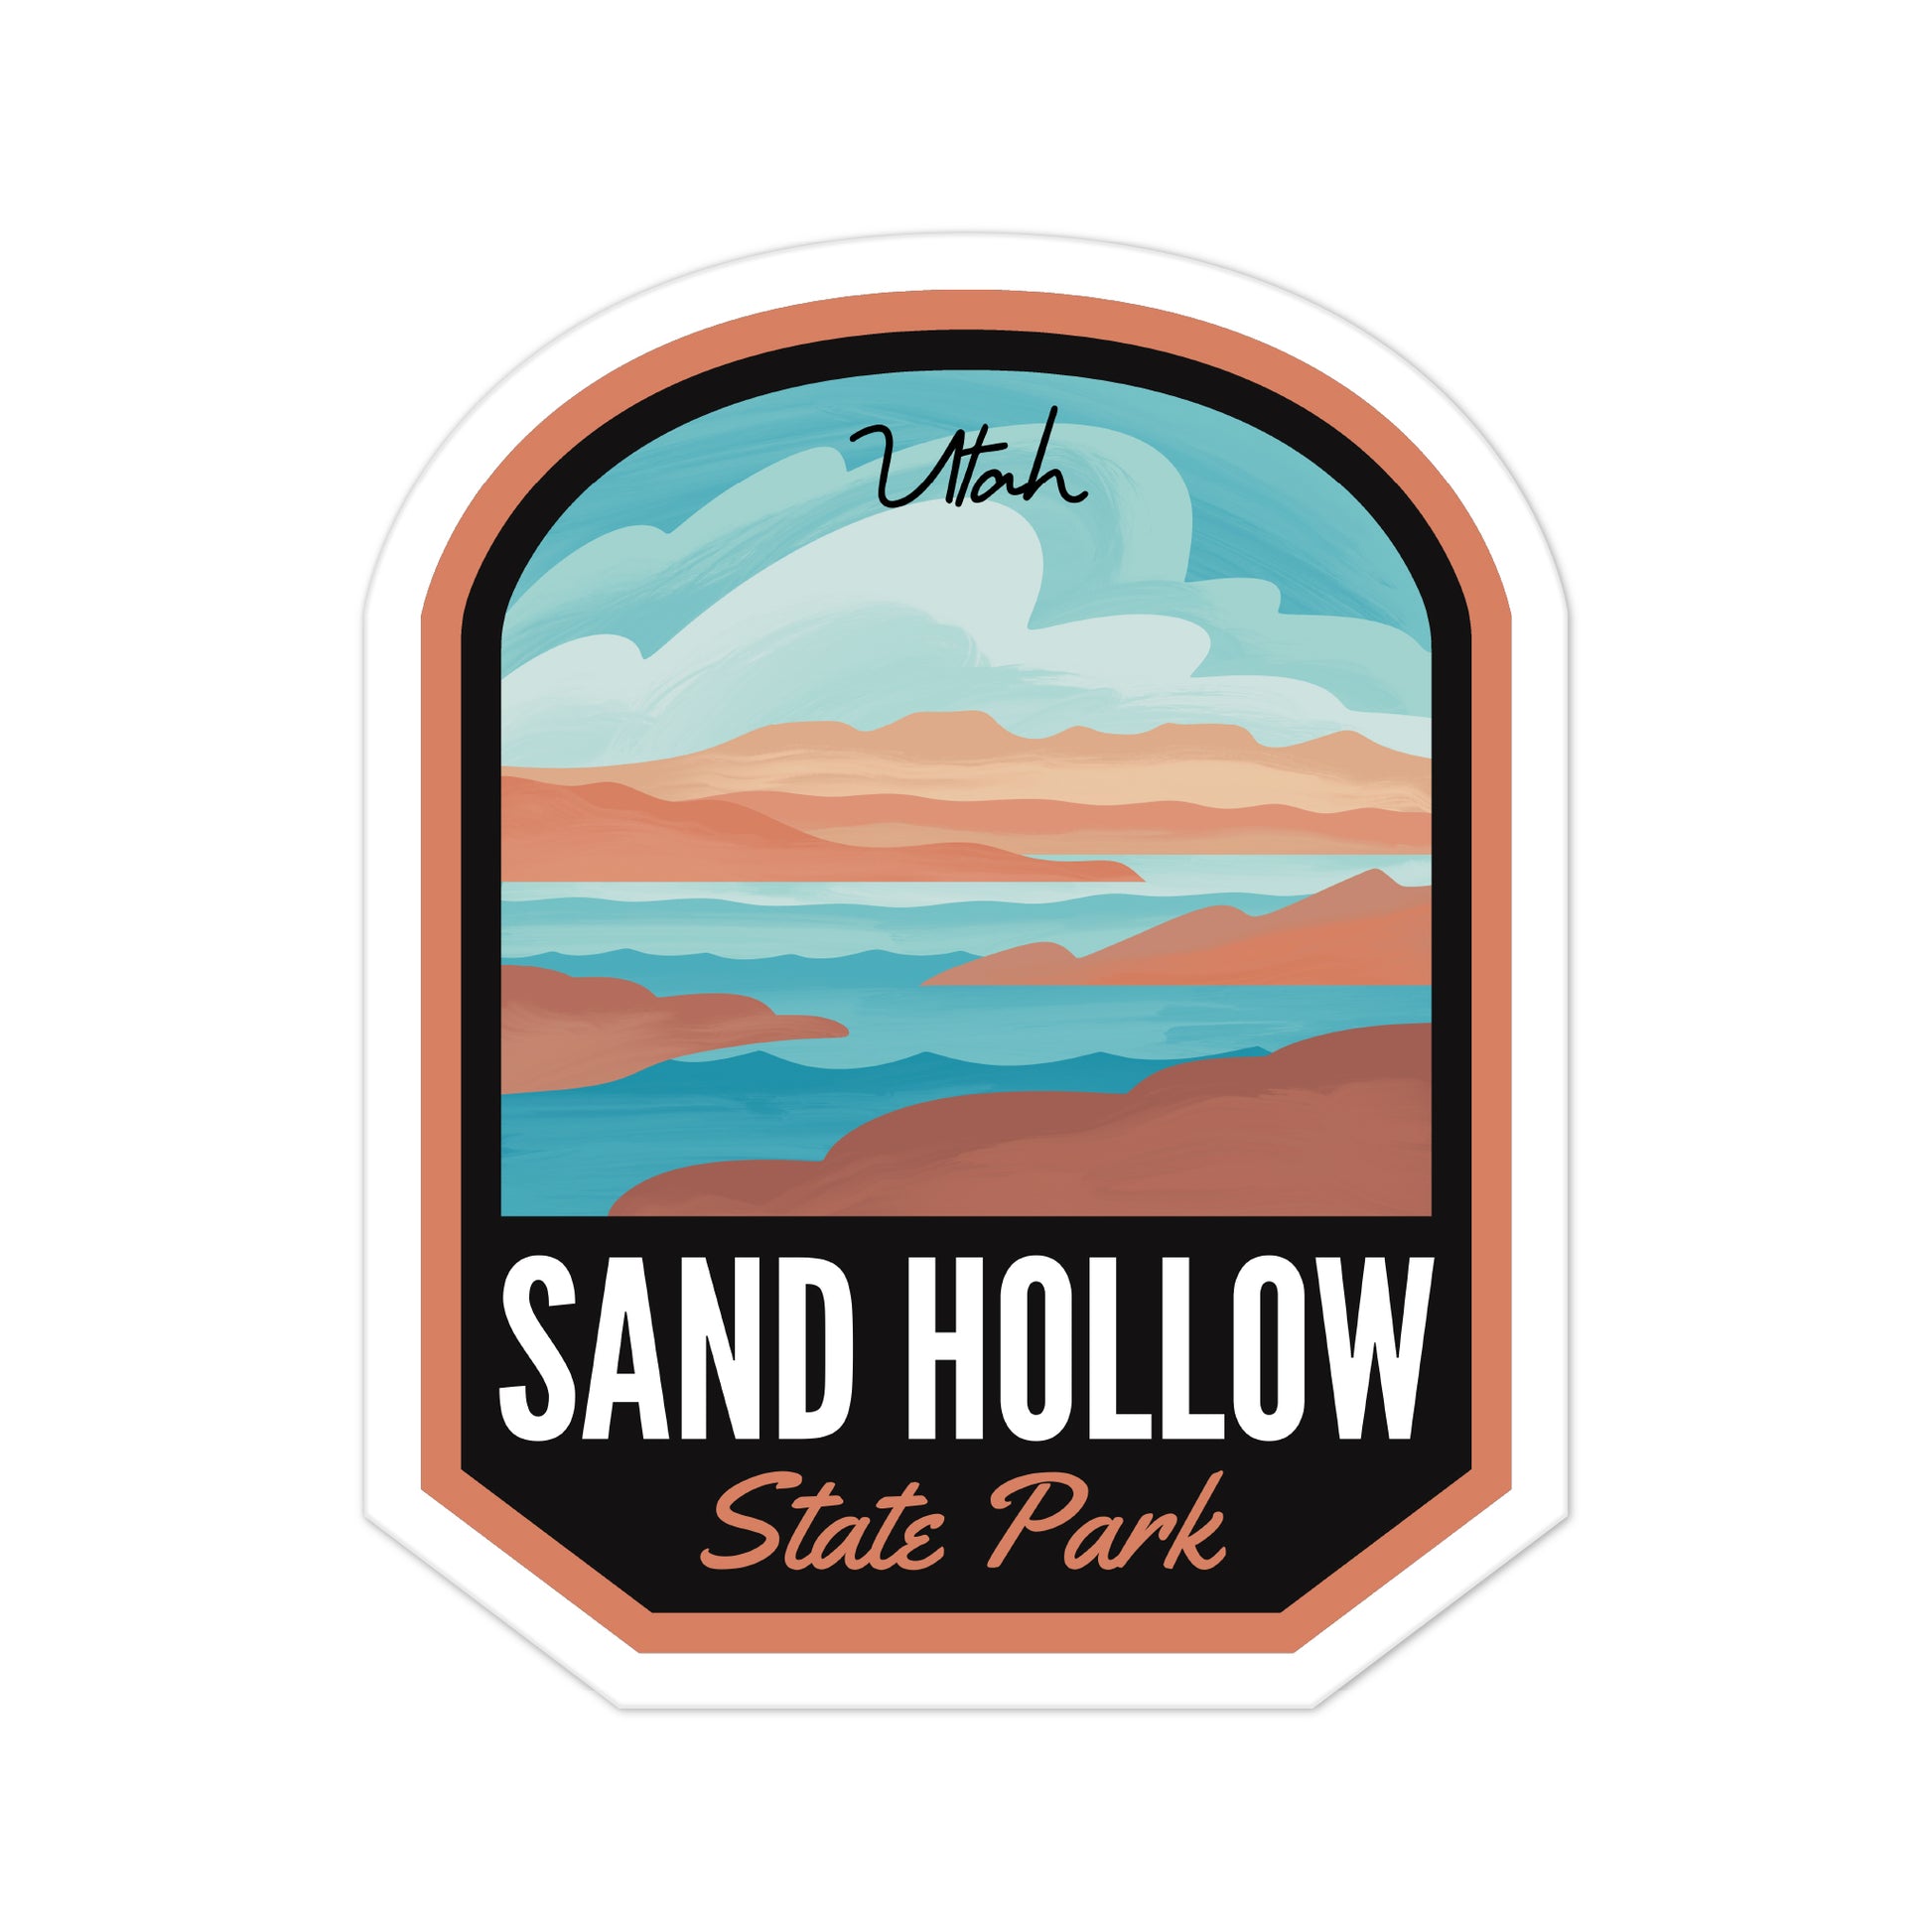 A sticker of Sand Hollow State Park